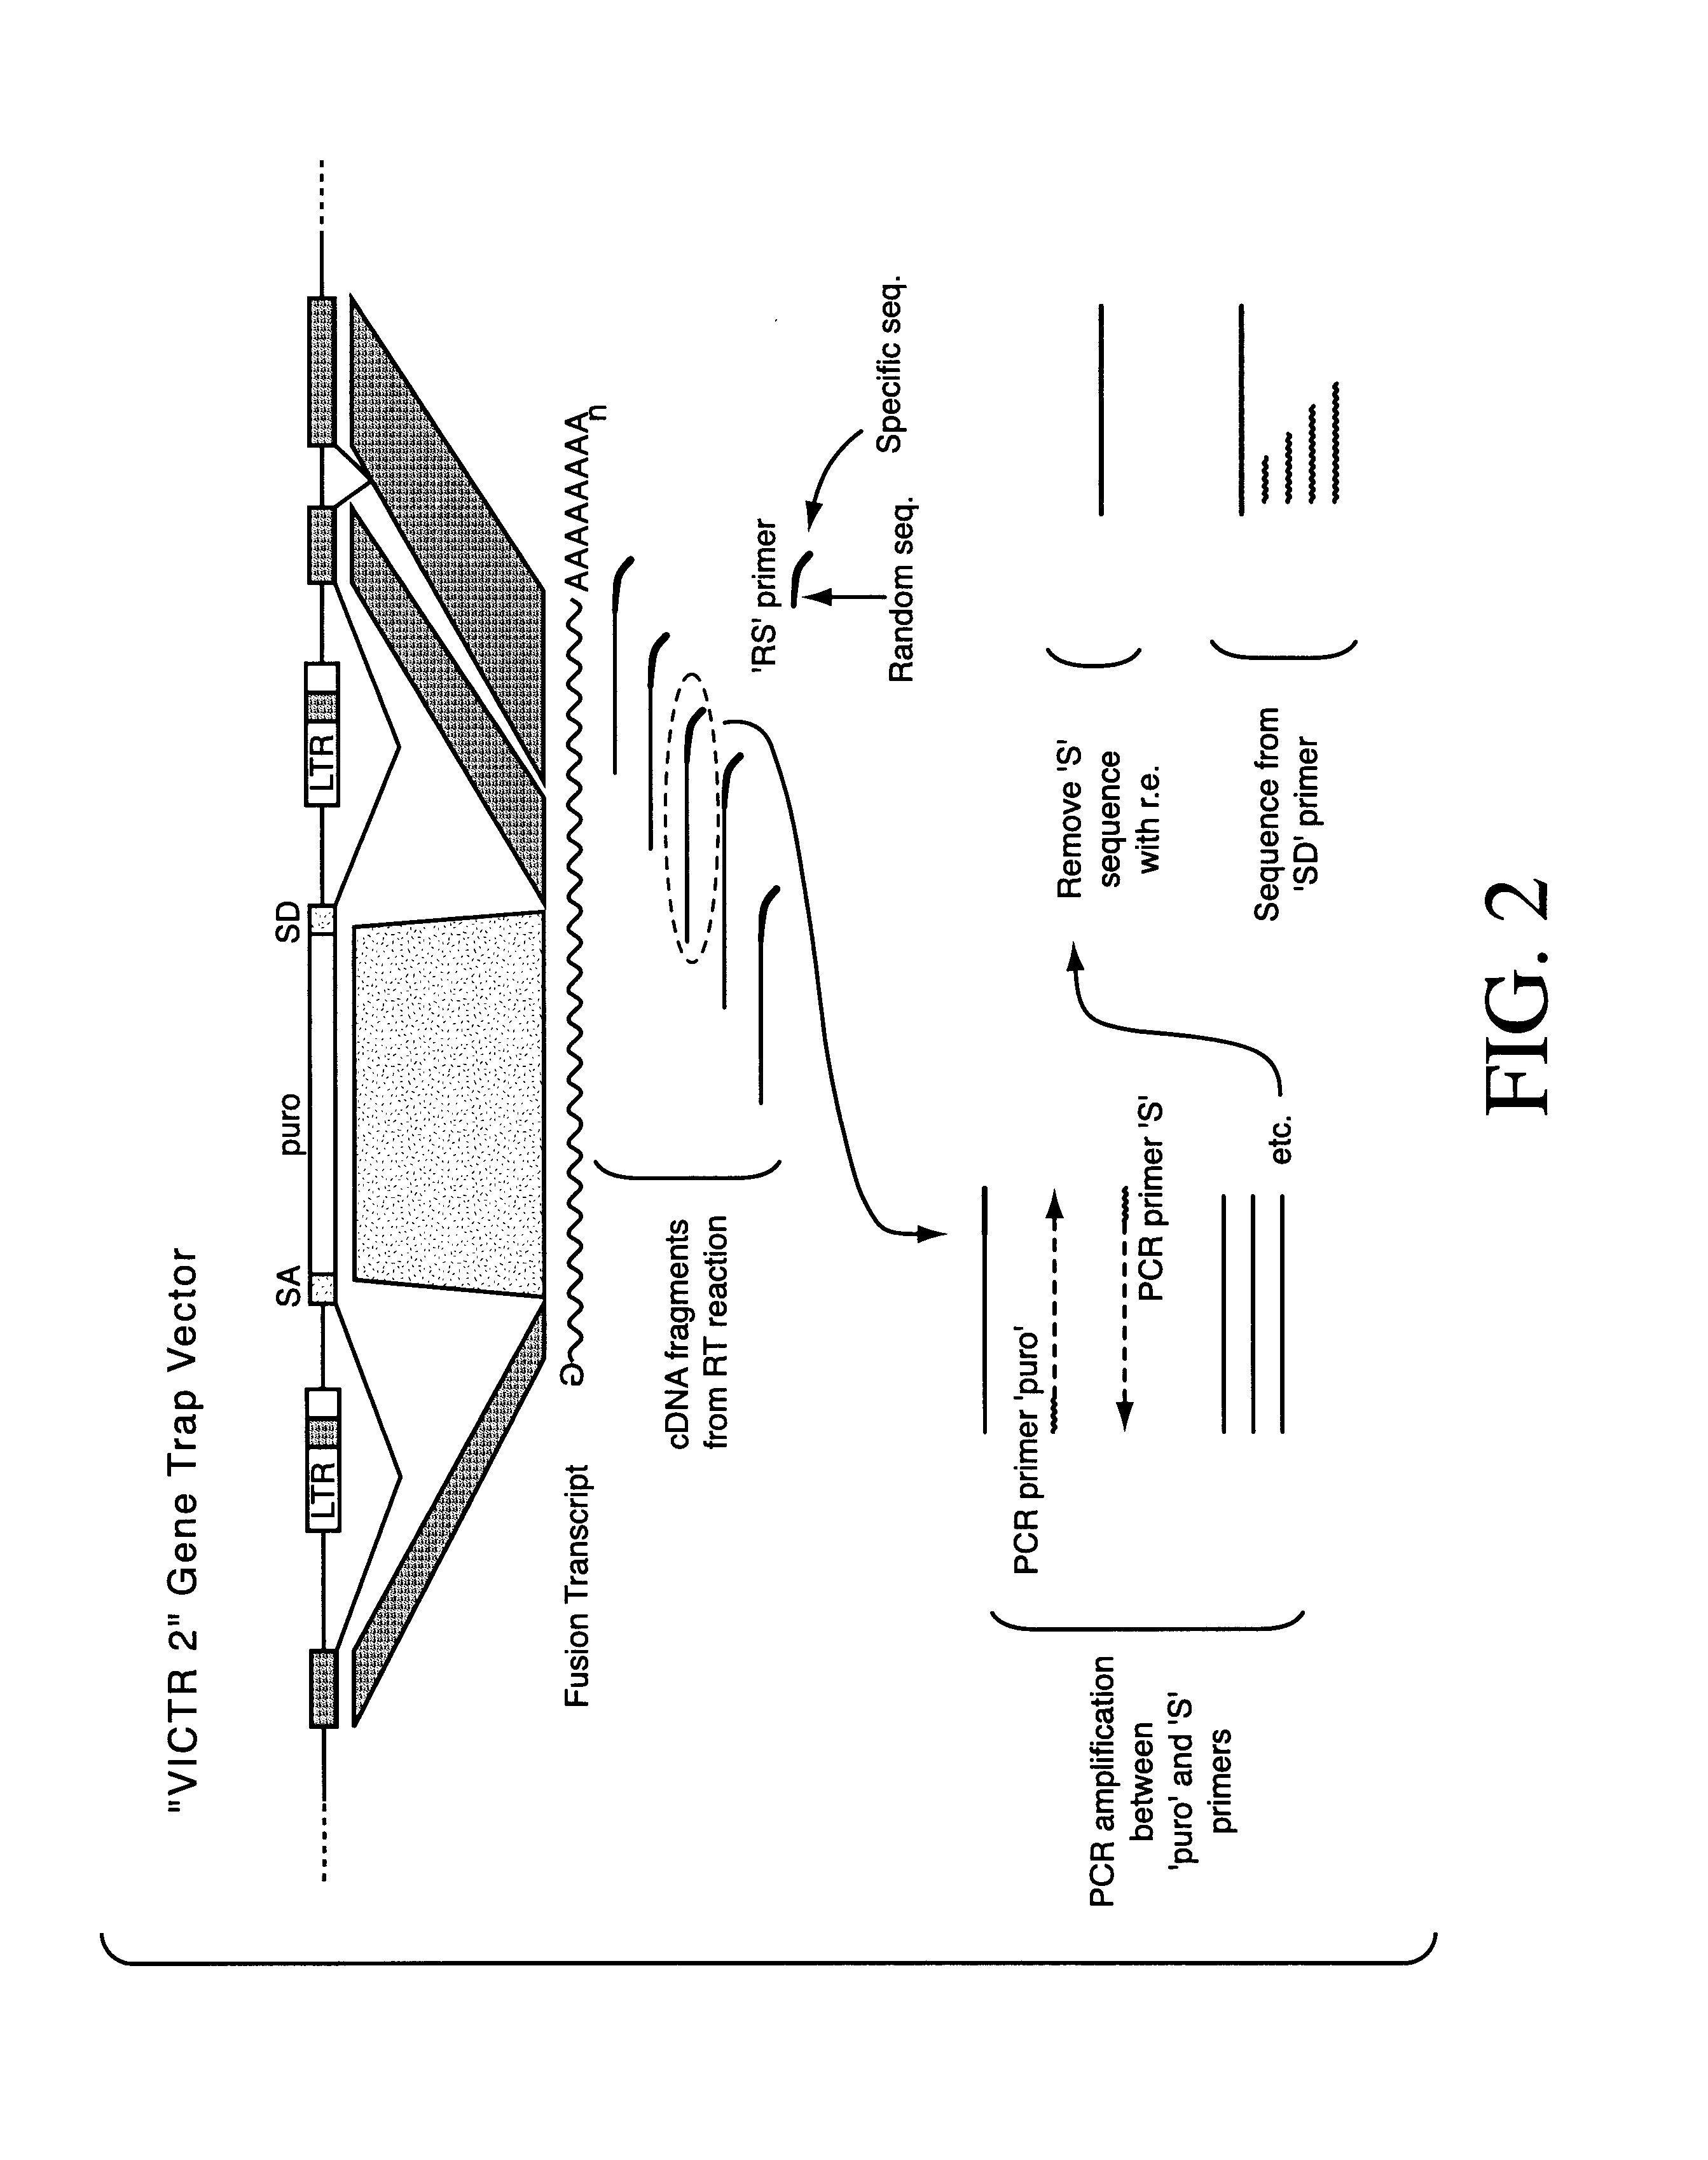 Indexed library of cells containing genomic modifications and methods of making and utilizing the same